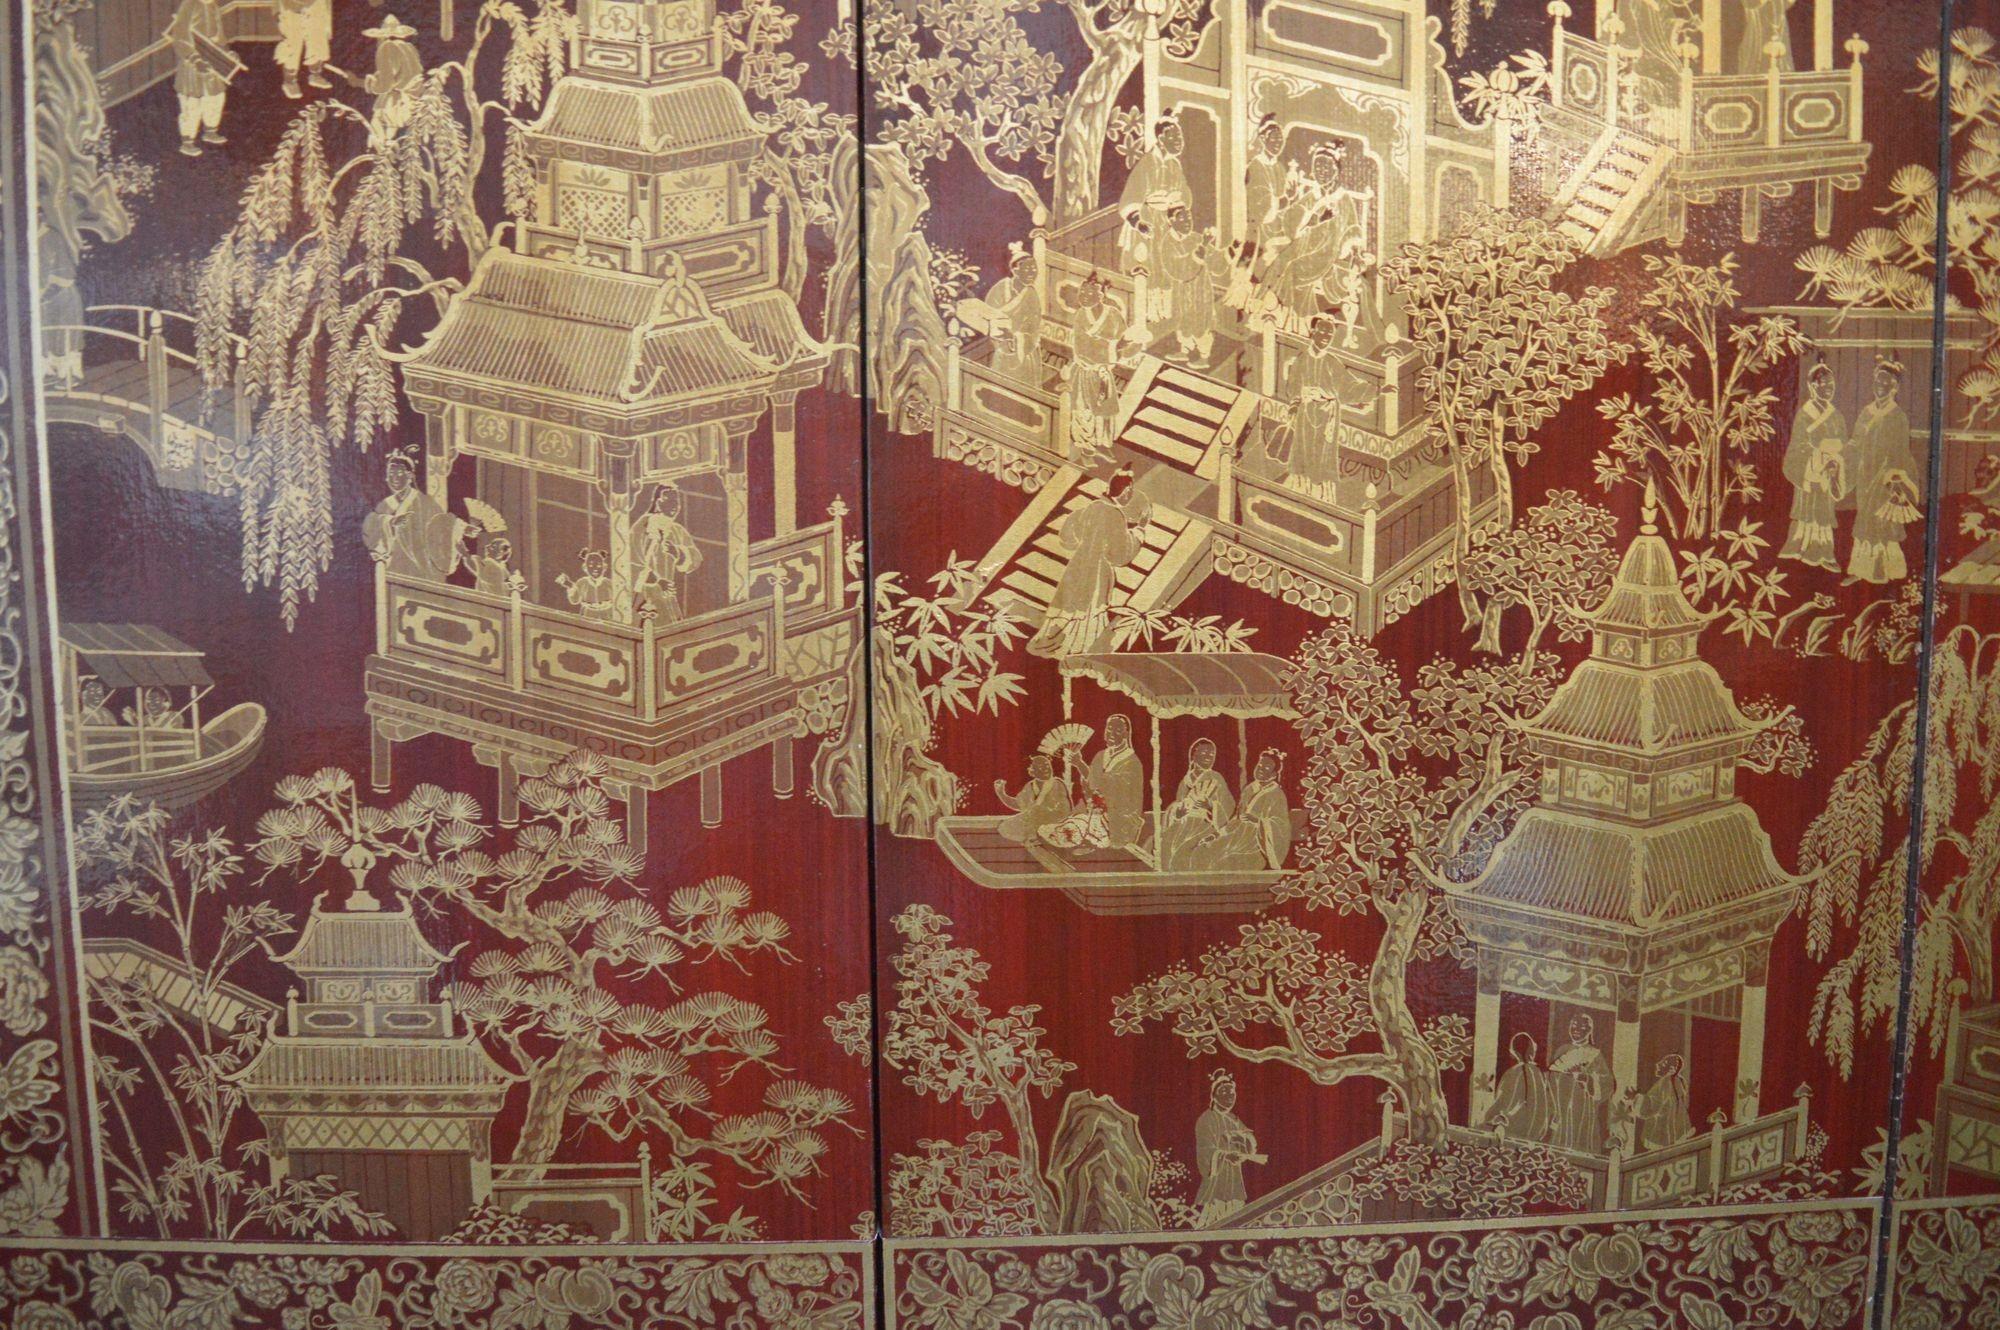 Wood Hand Painted Robert Crowder, Chinoiserie Screen With Gold Leaf Detail, China, C. For Sale